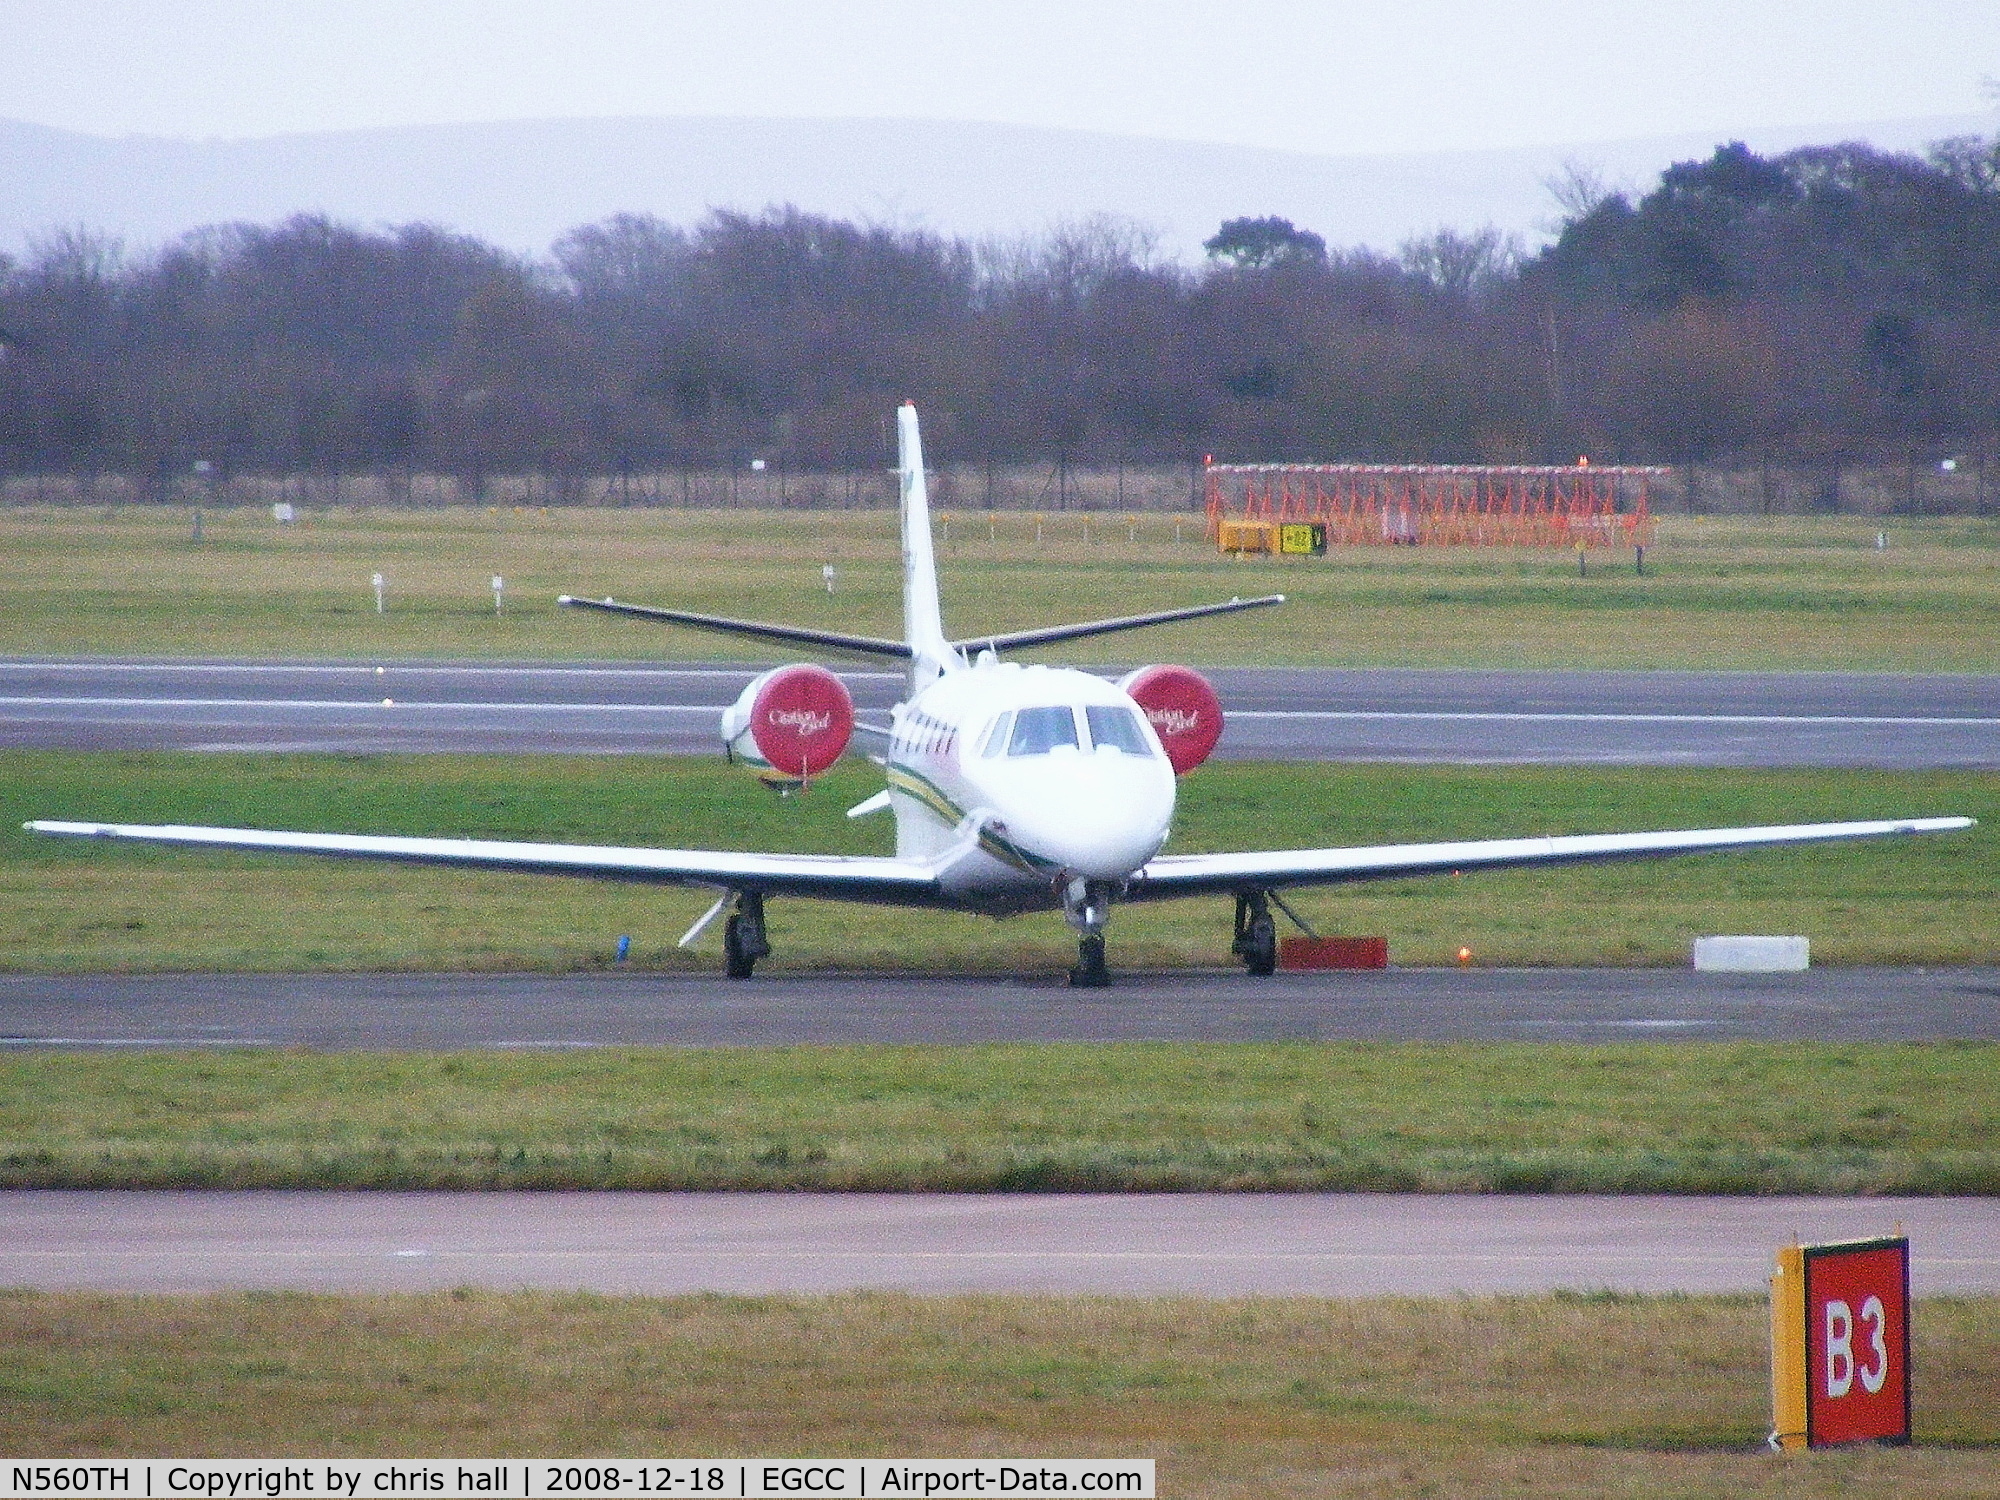 N560TH, 2001 Cessna 560XL Citation C/N 560-5215, on the Ocean Sky ramp at Manchester